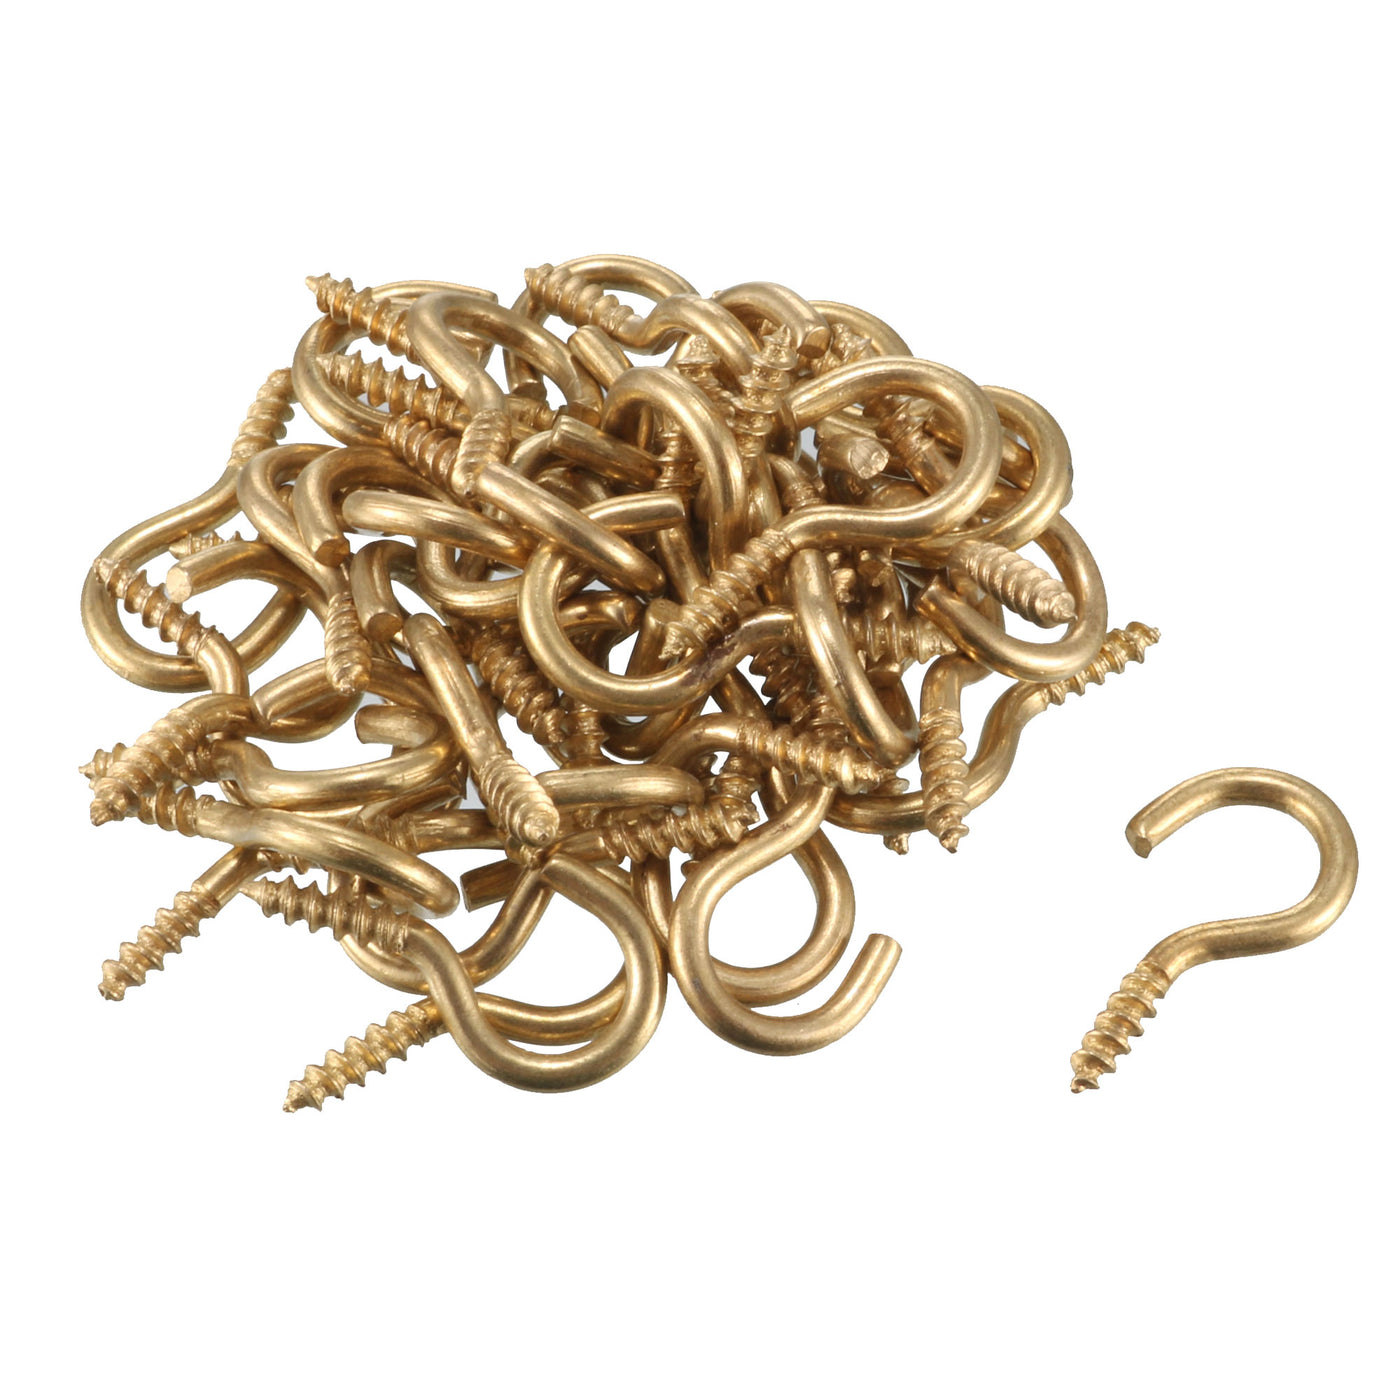 uxcell Uxcell 1.9mm Dia Thread 16mm Length Iron Brass Plated Self-Tapping Screw Hook 50pcs